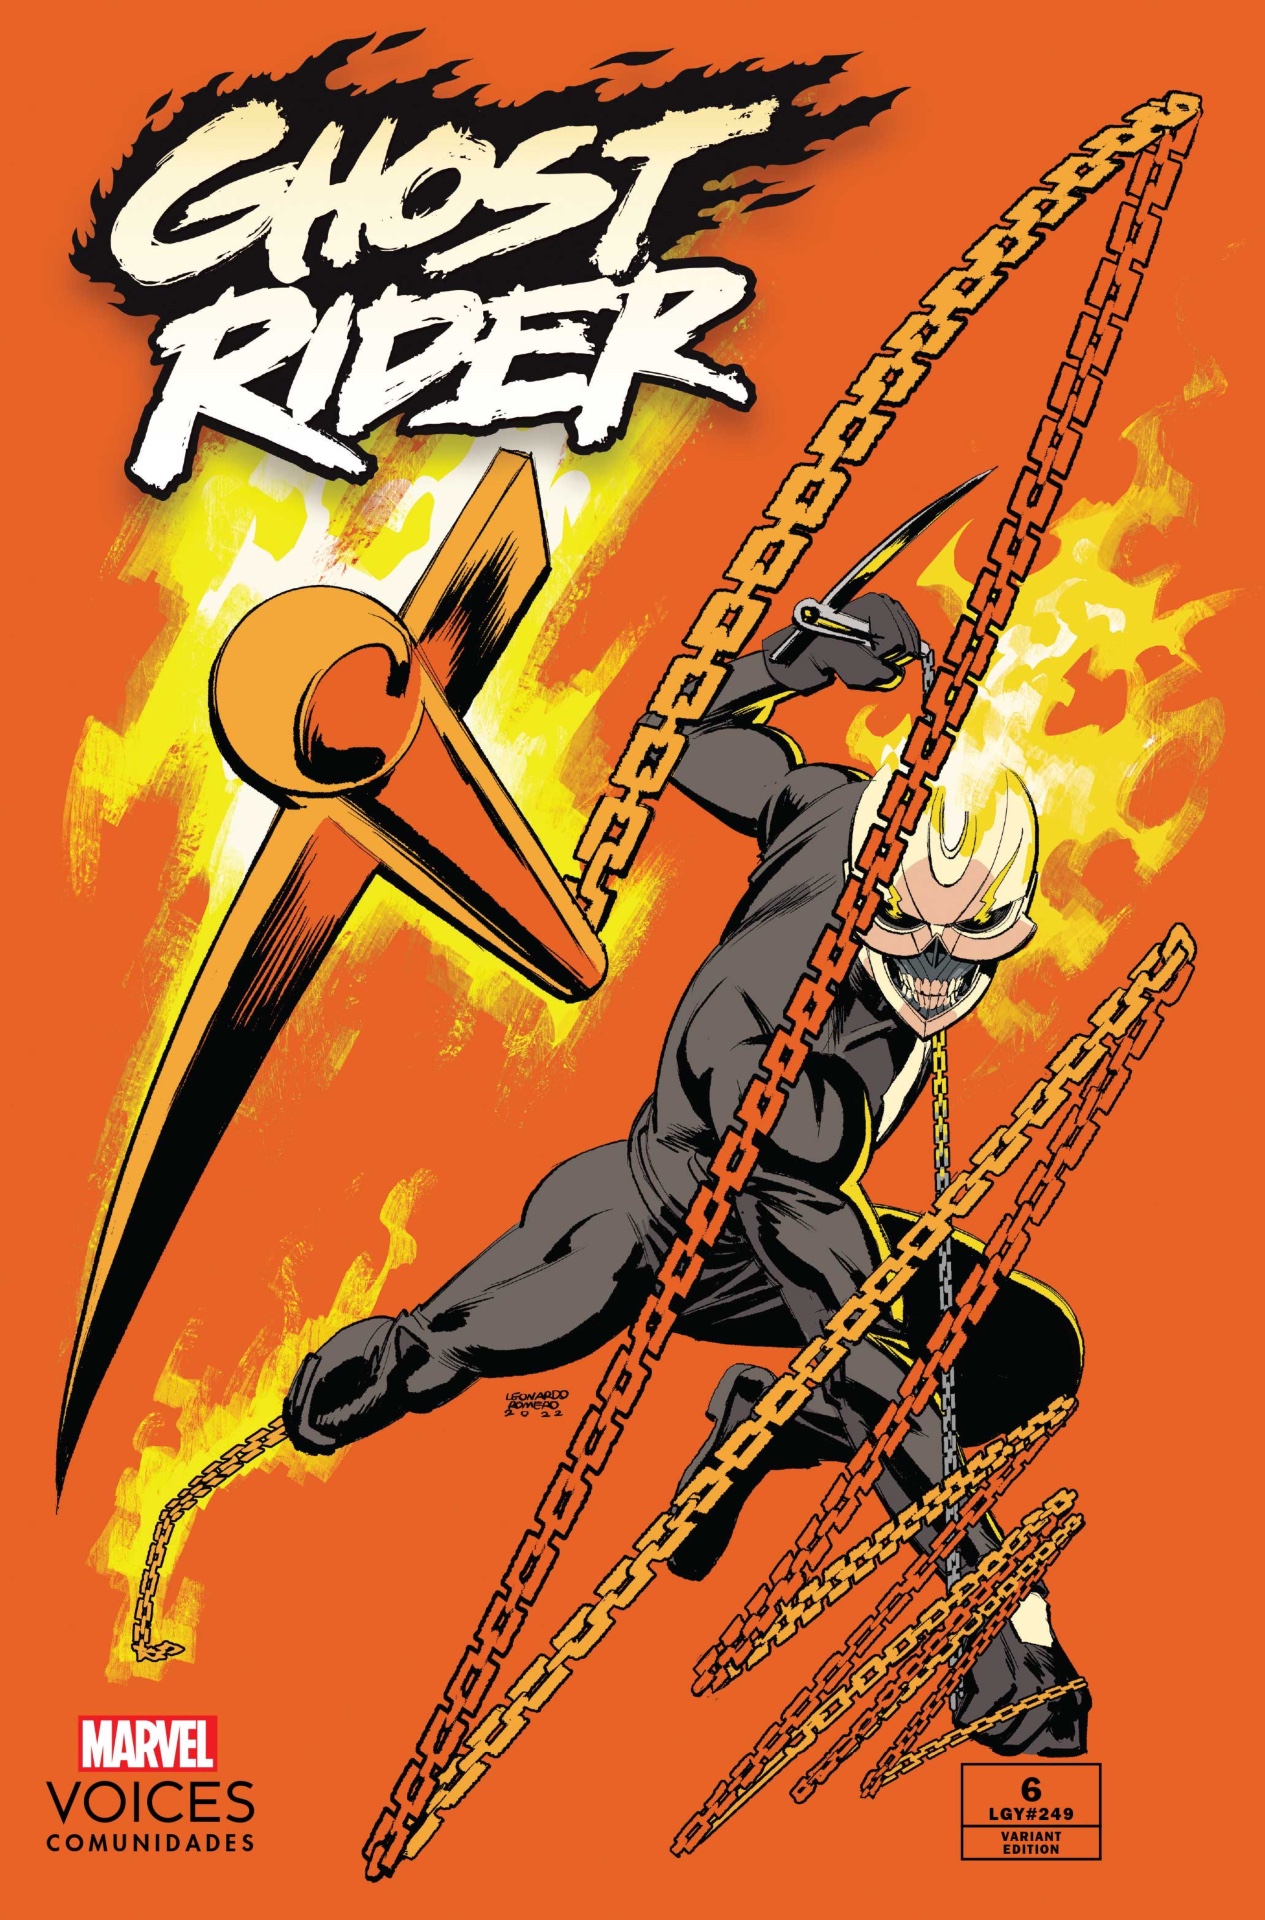 Ghost Rider #6 variant cover